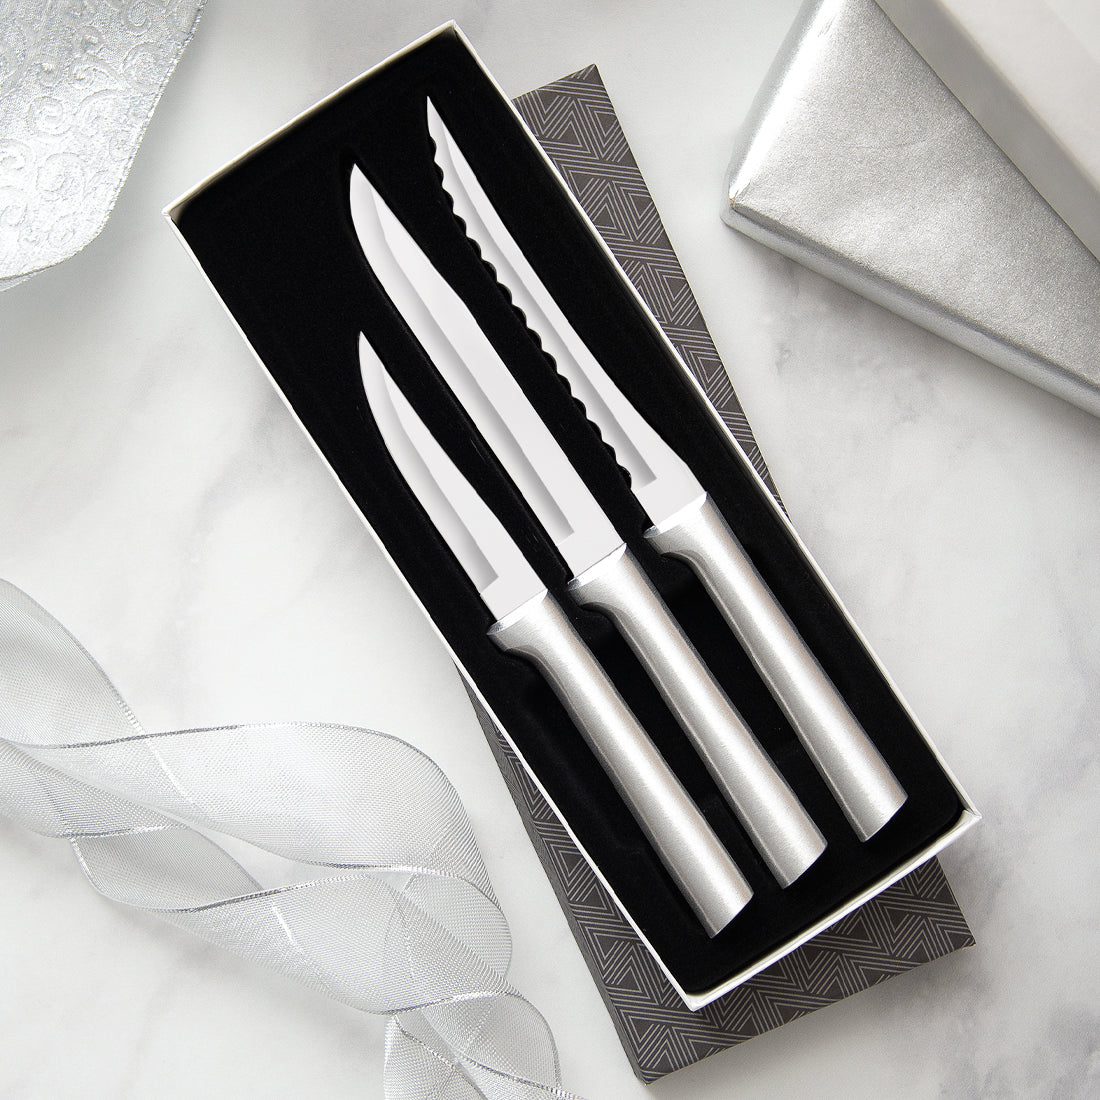 3-piece Cooking Essentials Gift Set with silver handles in a black-lined gift box